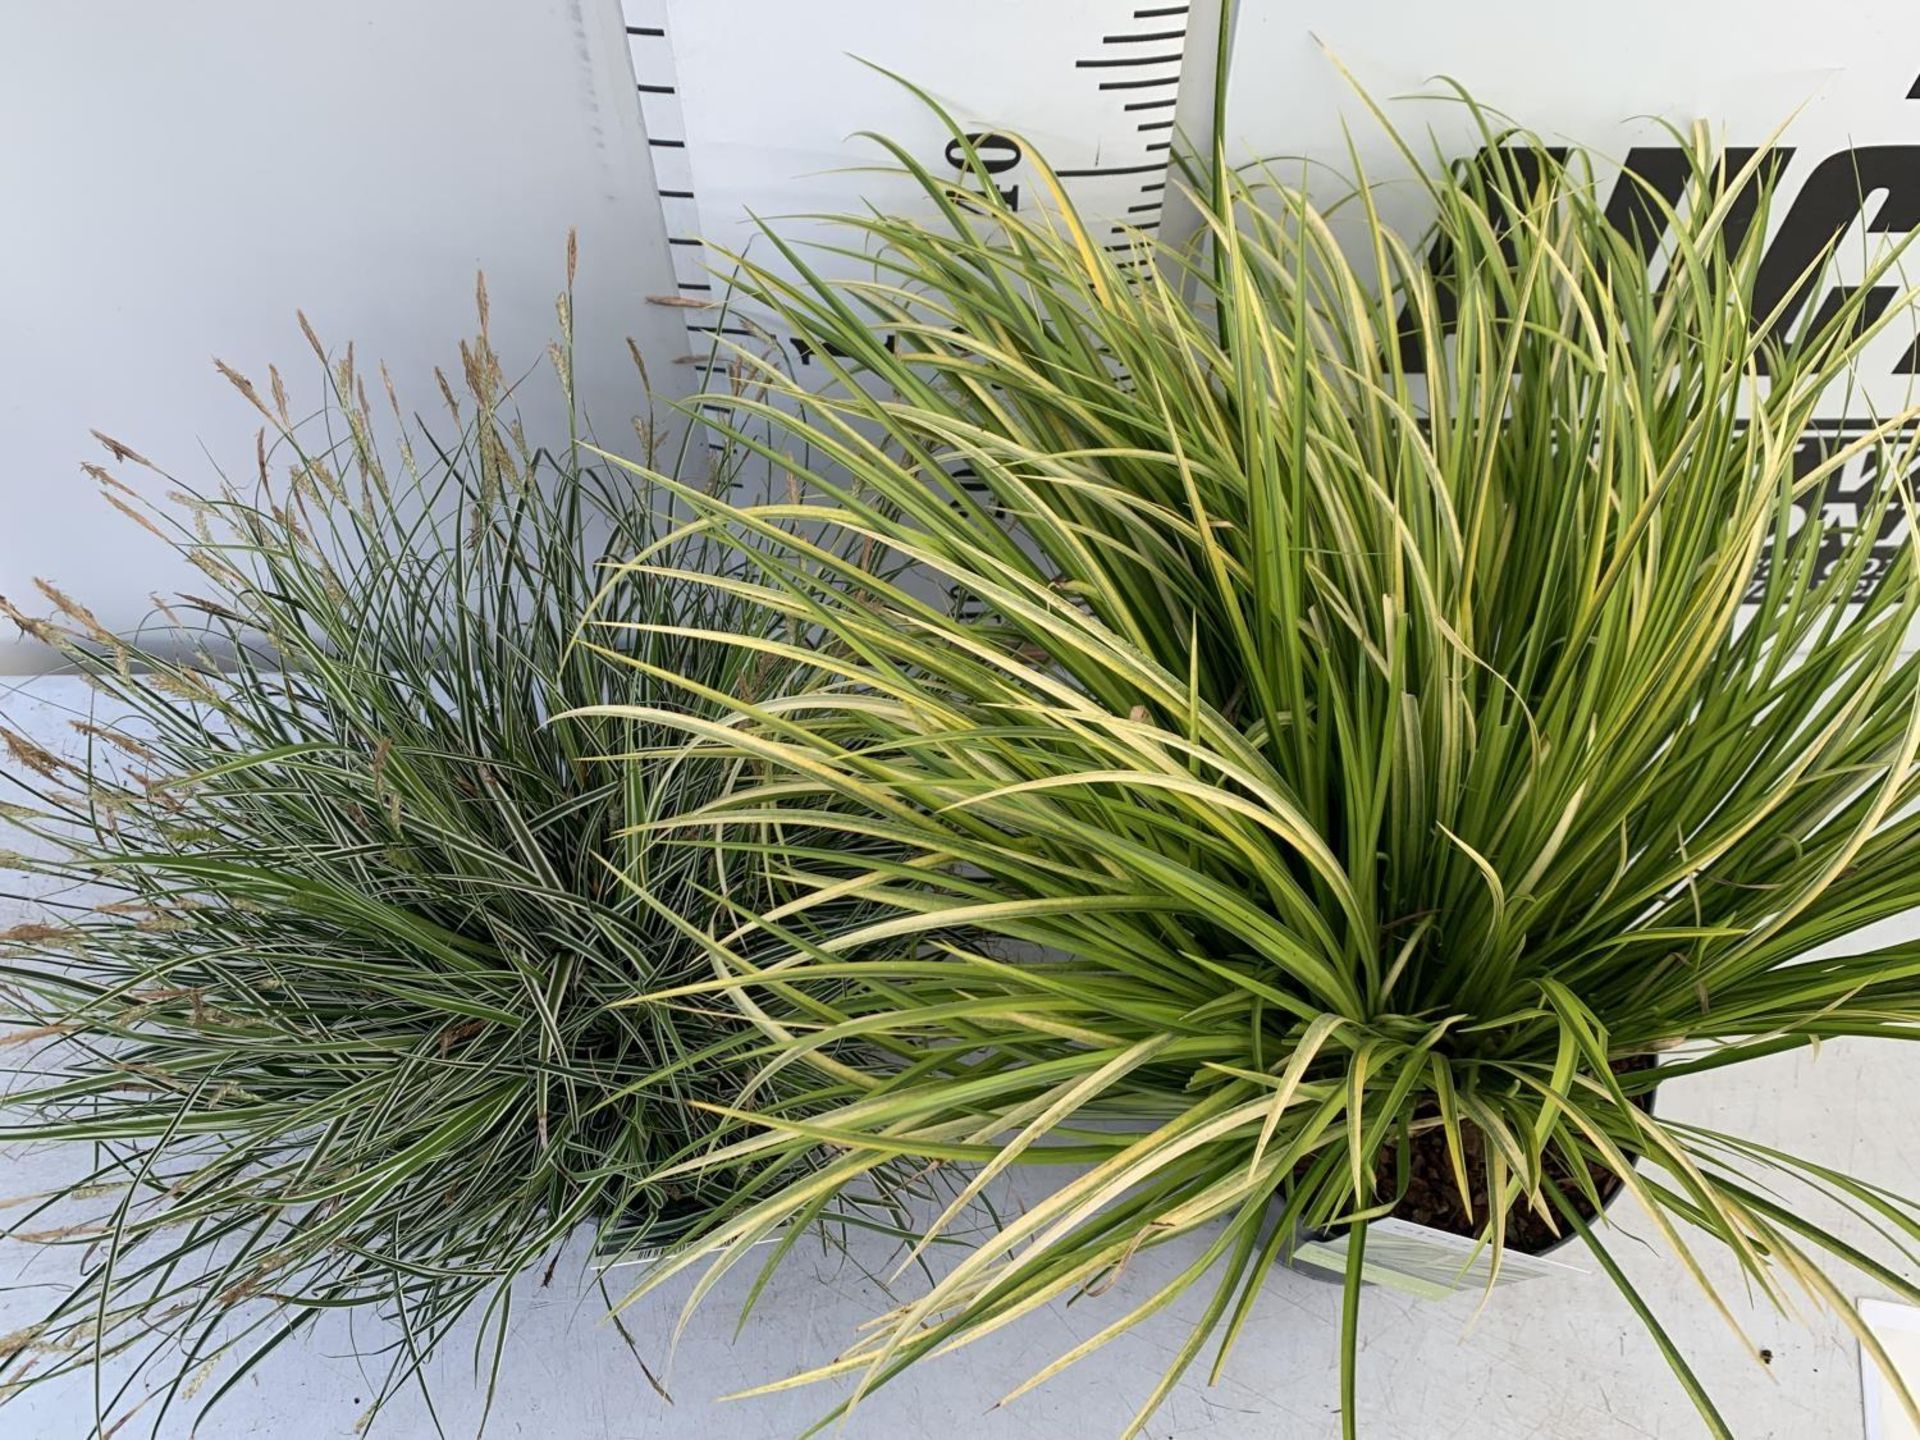 TWO HARDY AND EVERGREEN GRASSES CAREX OSHIMENSIS AND ACORUS GRAMINEUS IN 3 LTR POTS 45CM TALL PLUS - Image 4 of 12